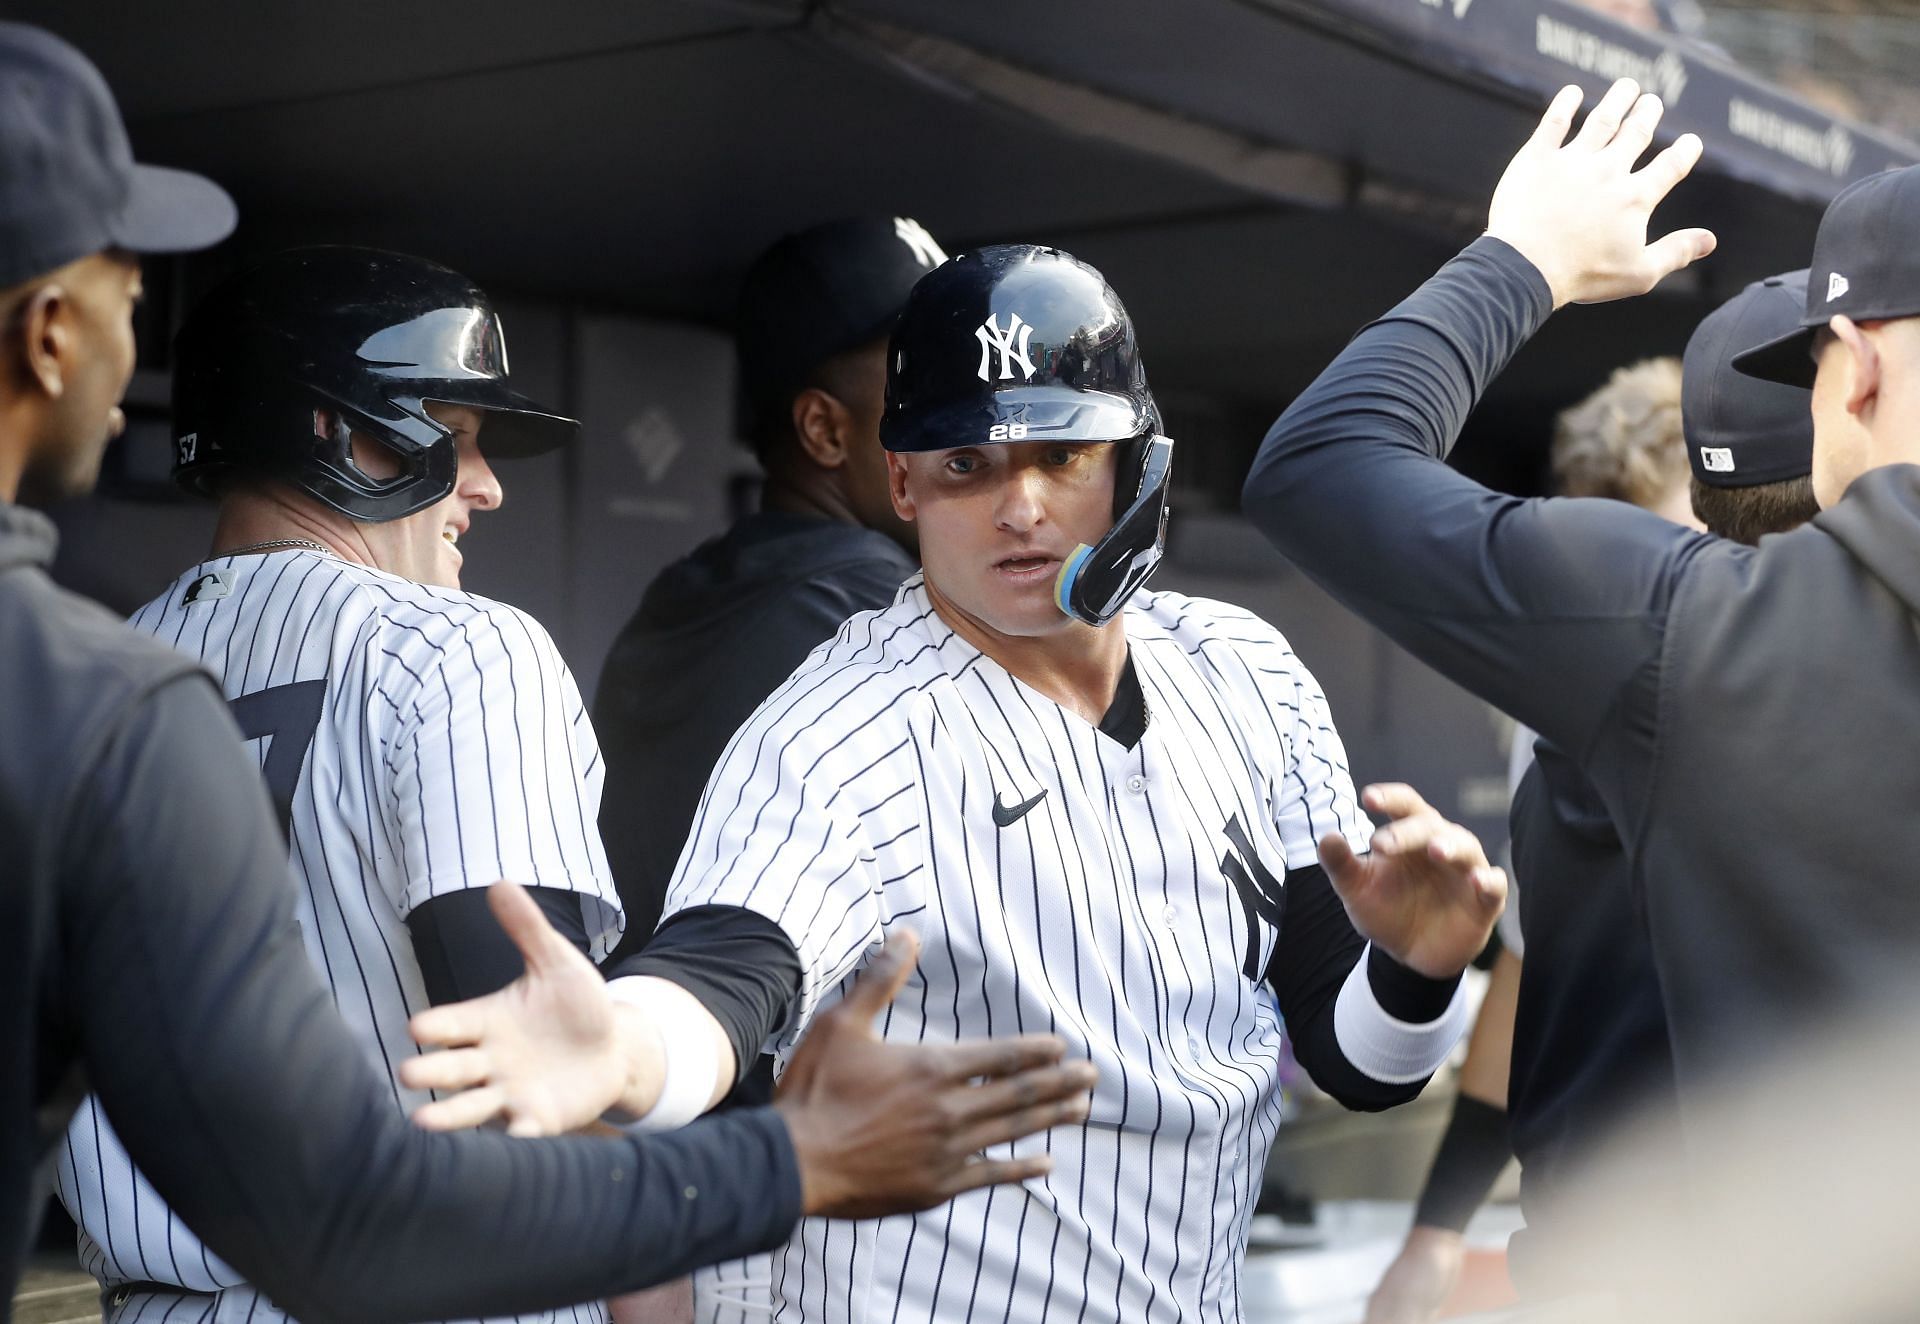 Josh Donaldson of the New York Yankees celebrates scoring a run in the dugout during the second inning against the Boston Red Sox at Yankee Stadium on June 11.